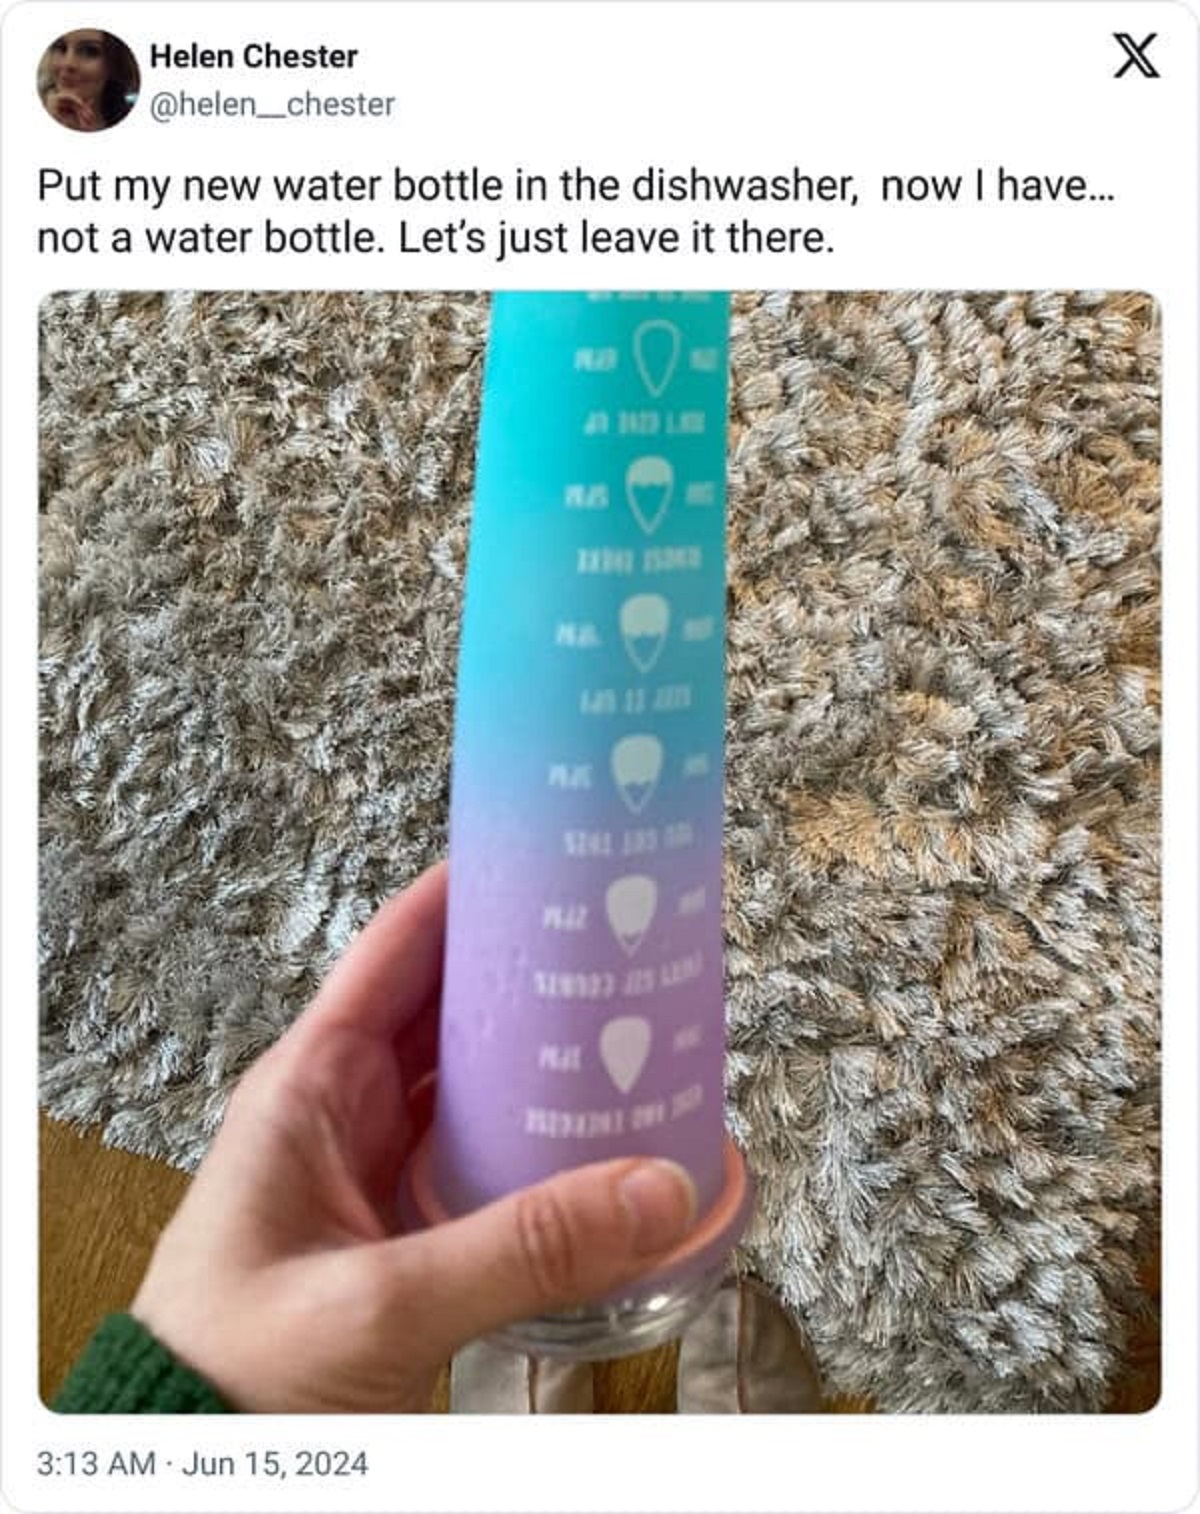 screenshot - Helen Chester Put my new water bottle in the dishwasher, now I have... not a water bottle. Let's just leave it there. Pil X